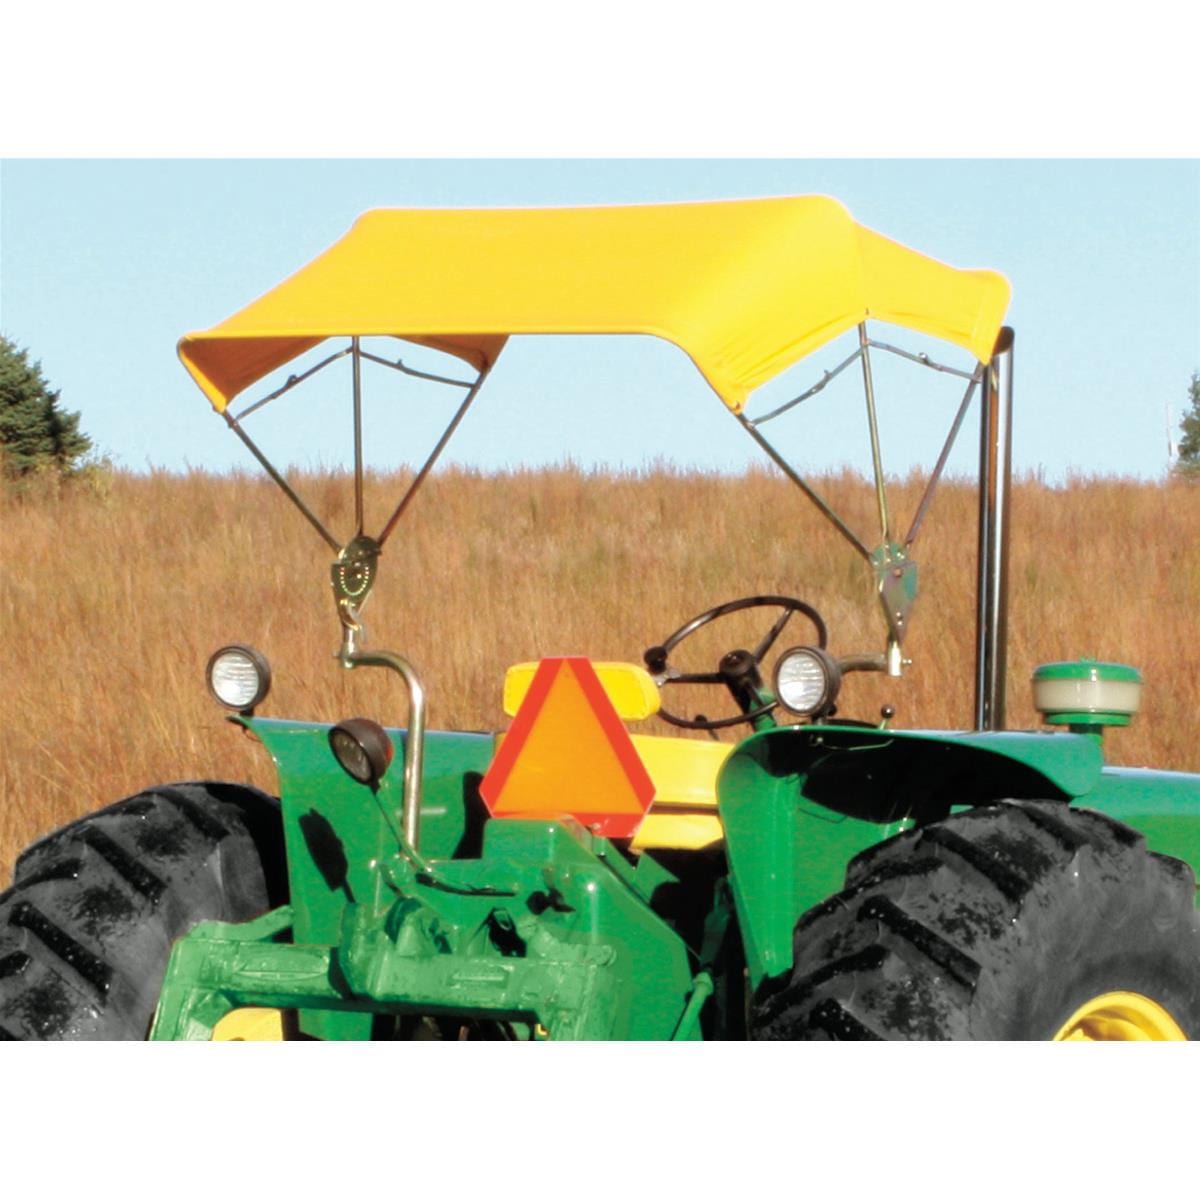 buggy shade covers